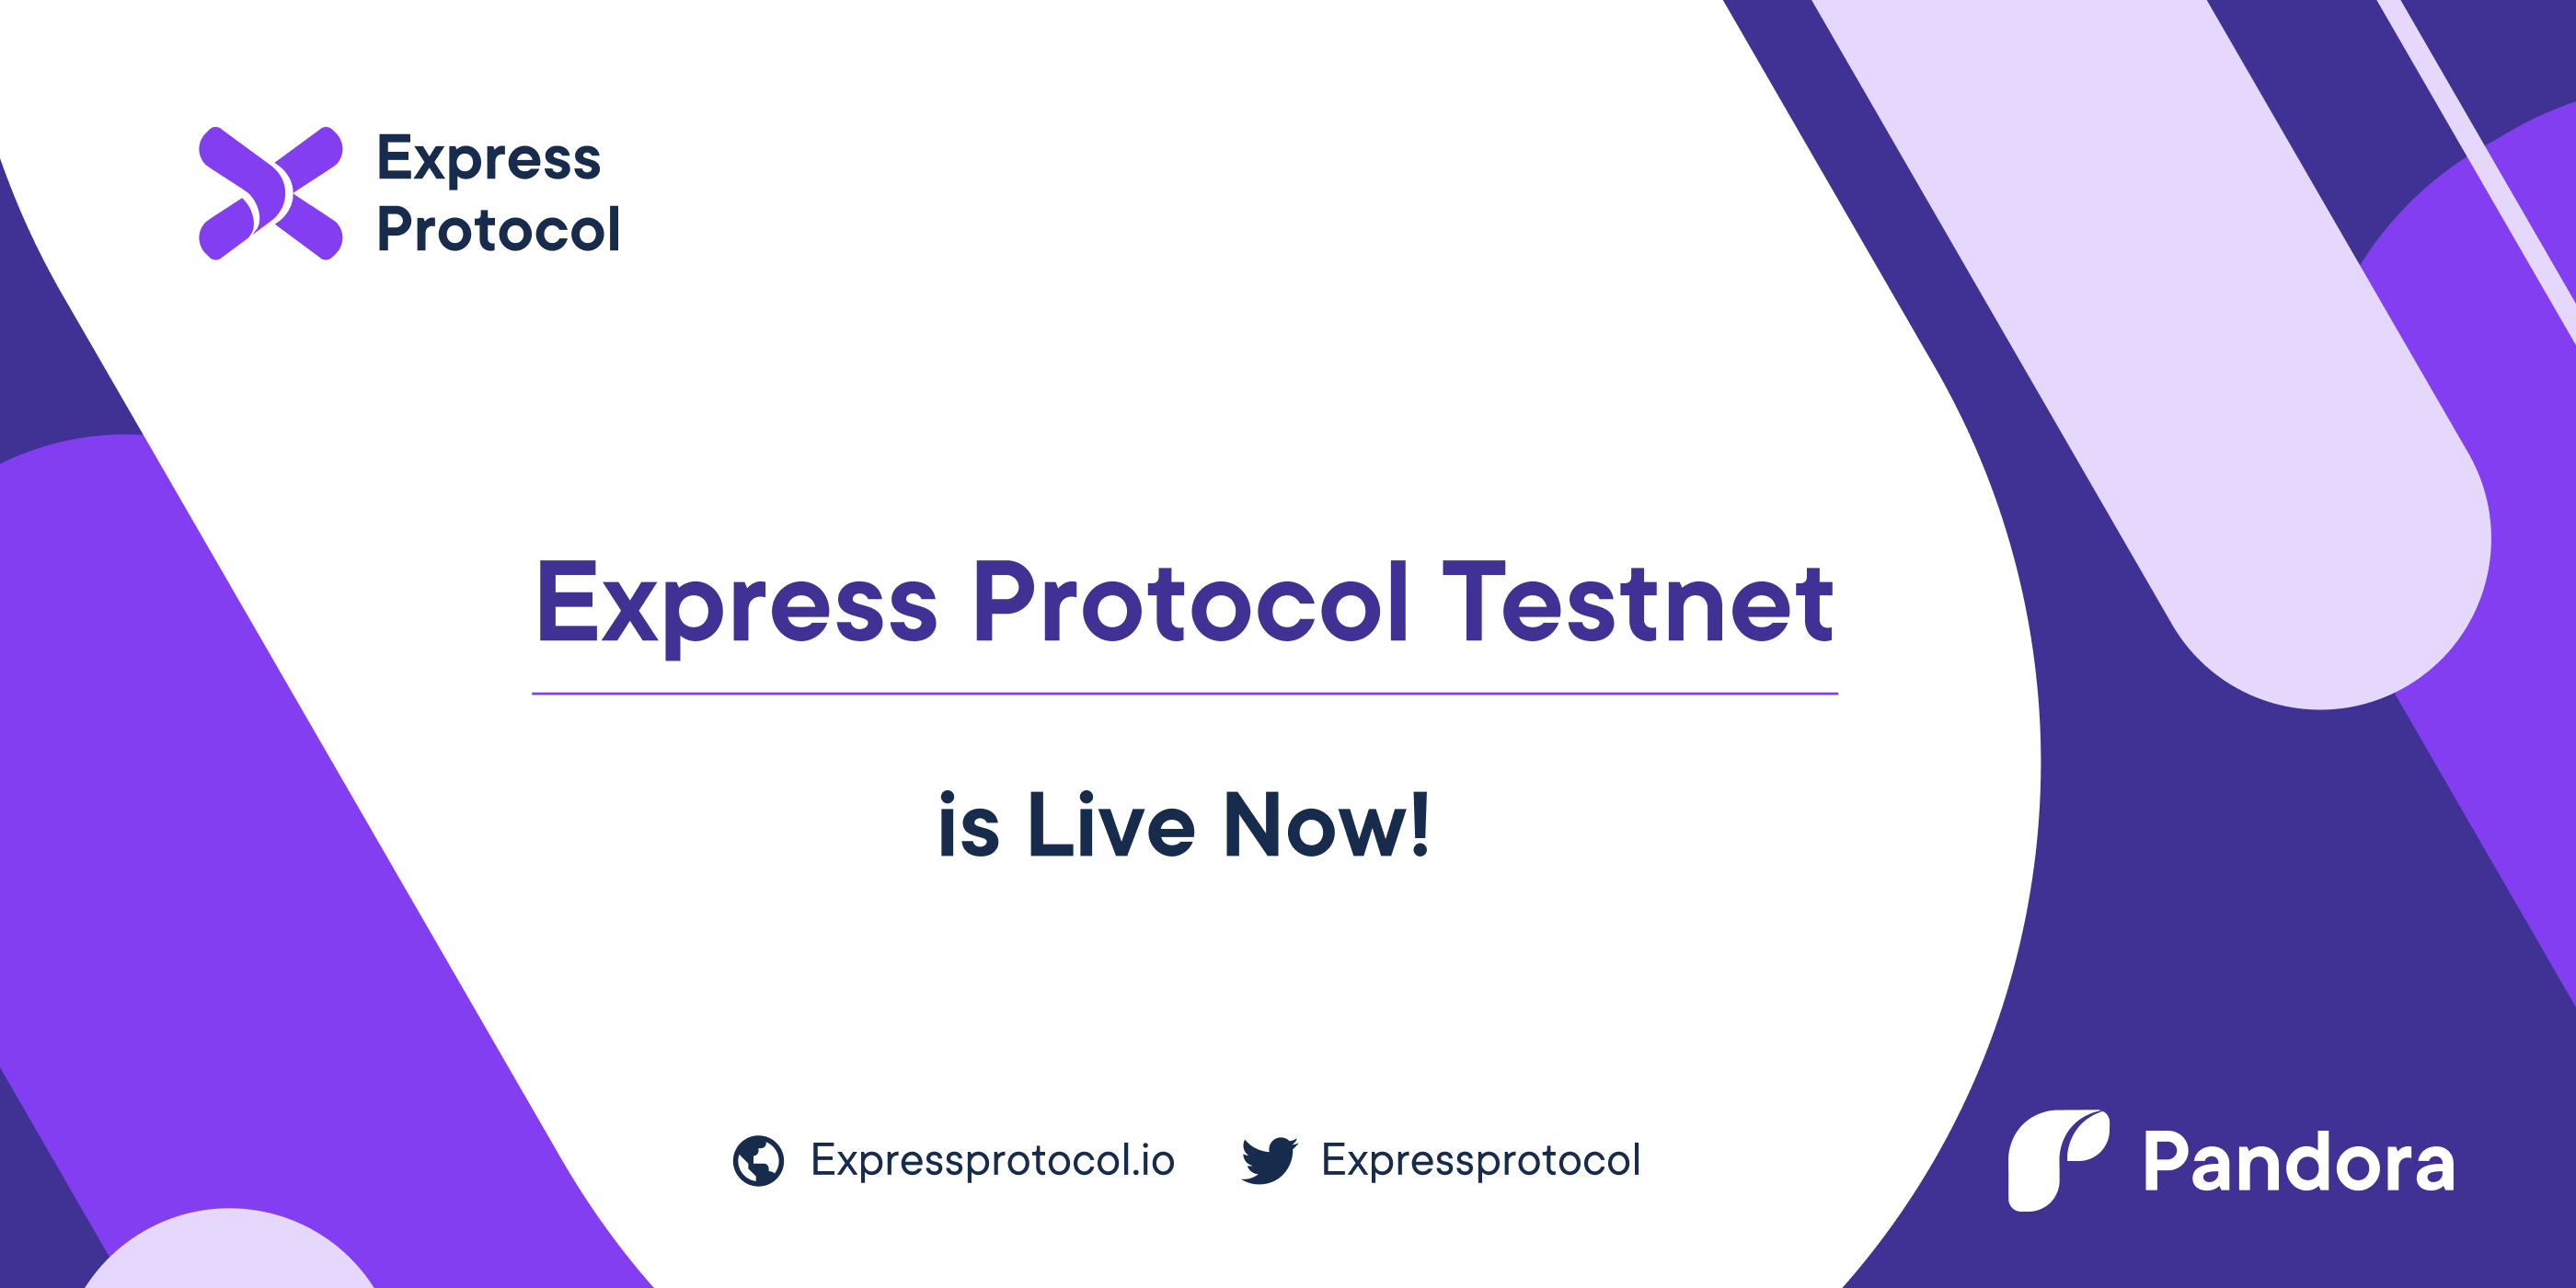 Express Protocol Testnet is Live Now